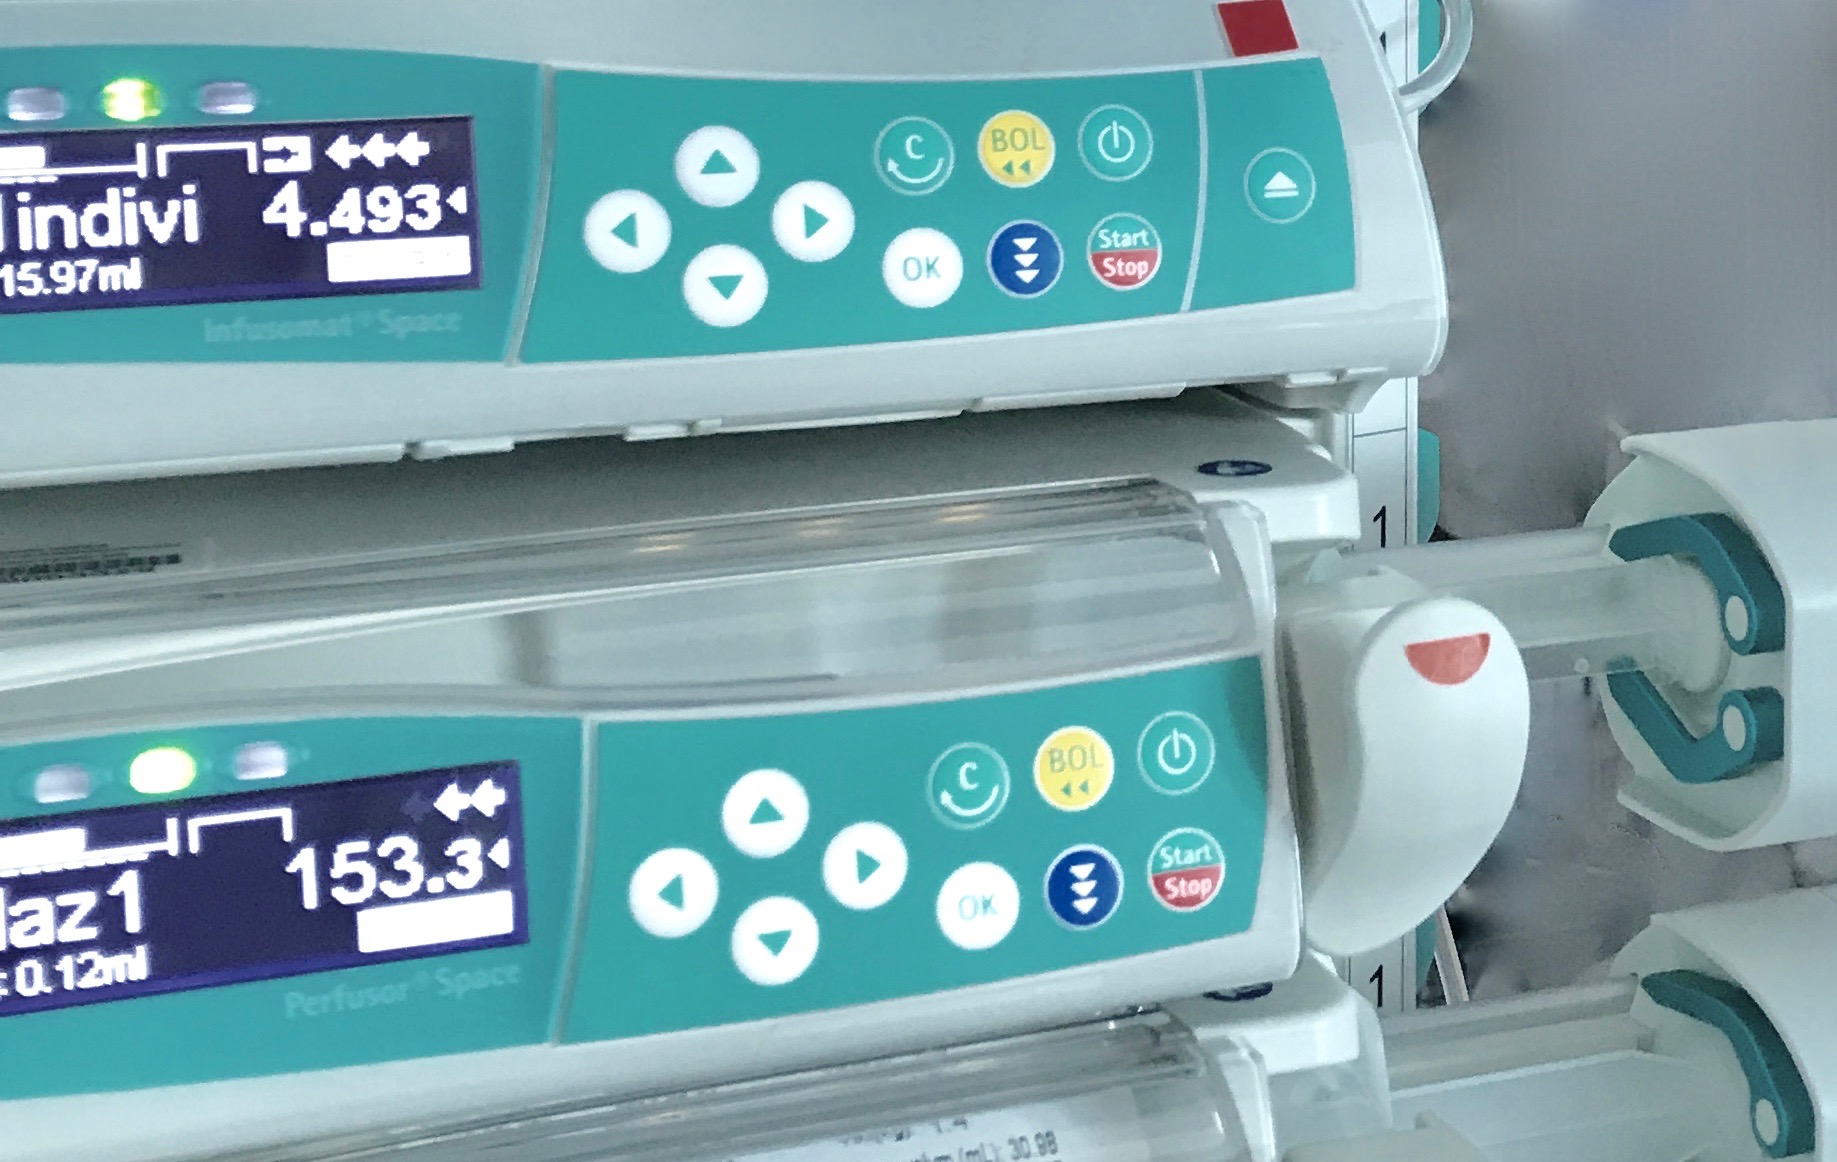 Infusion pumps